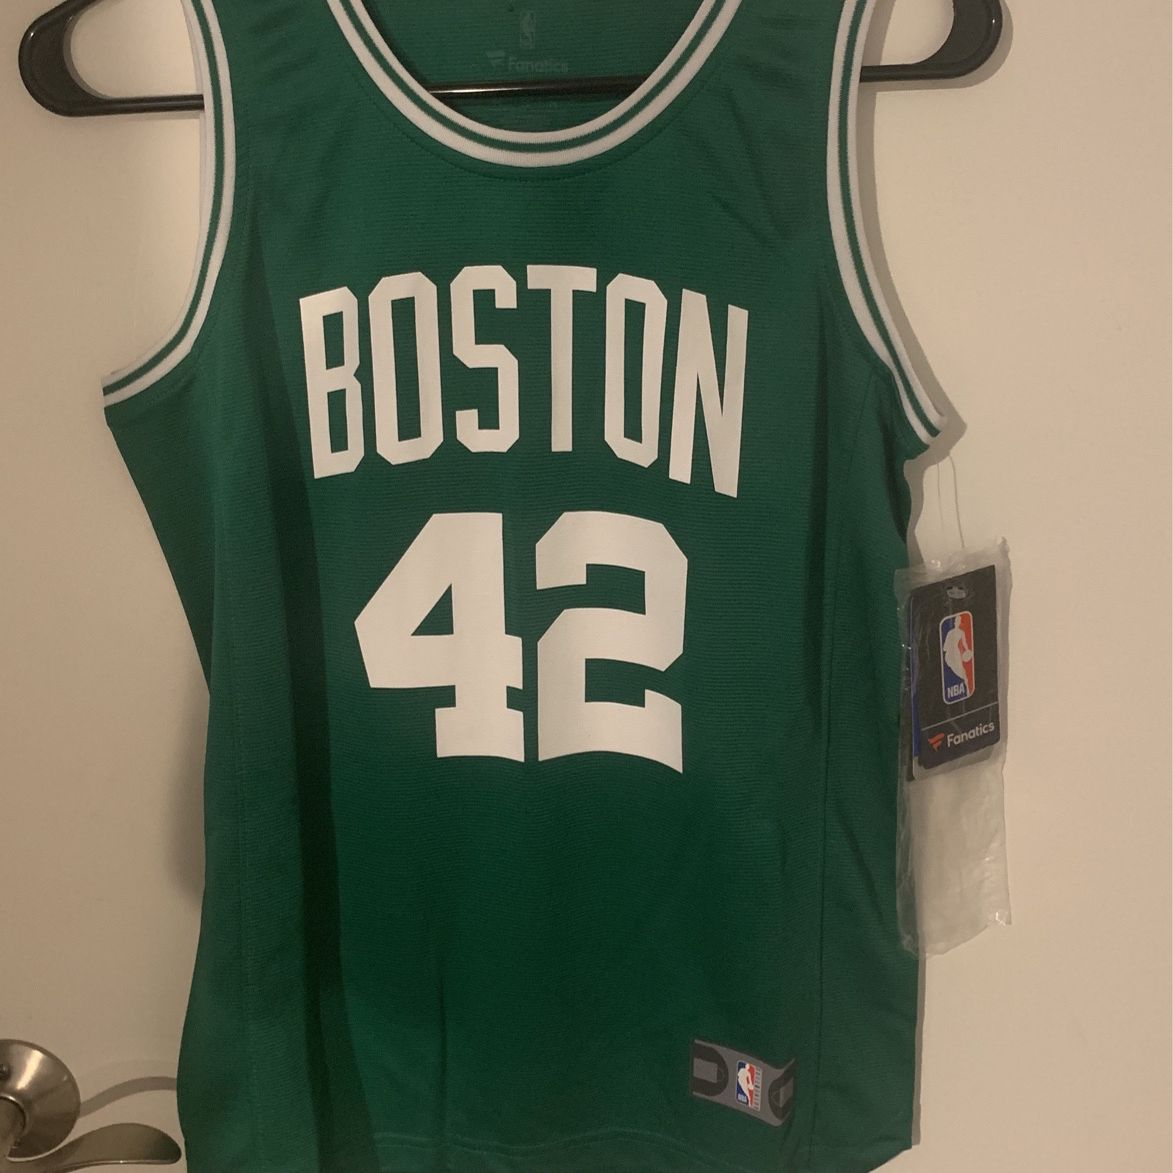 Authentic Boston Celtics Nike Kyrie Irving jersey adult size large for Sale  in Loma Linda, CA - OfferUp